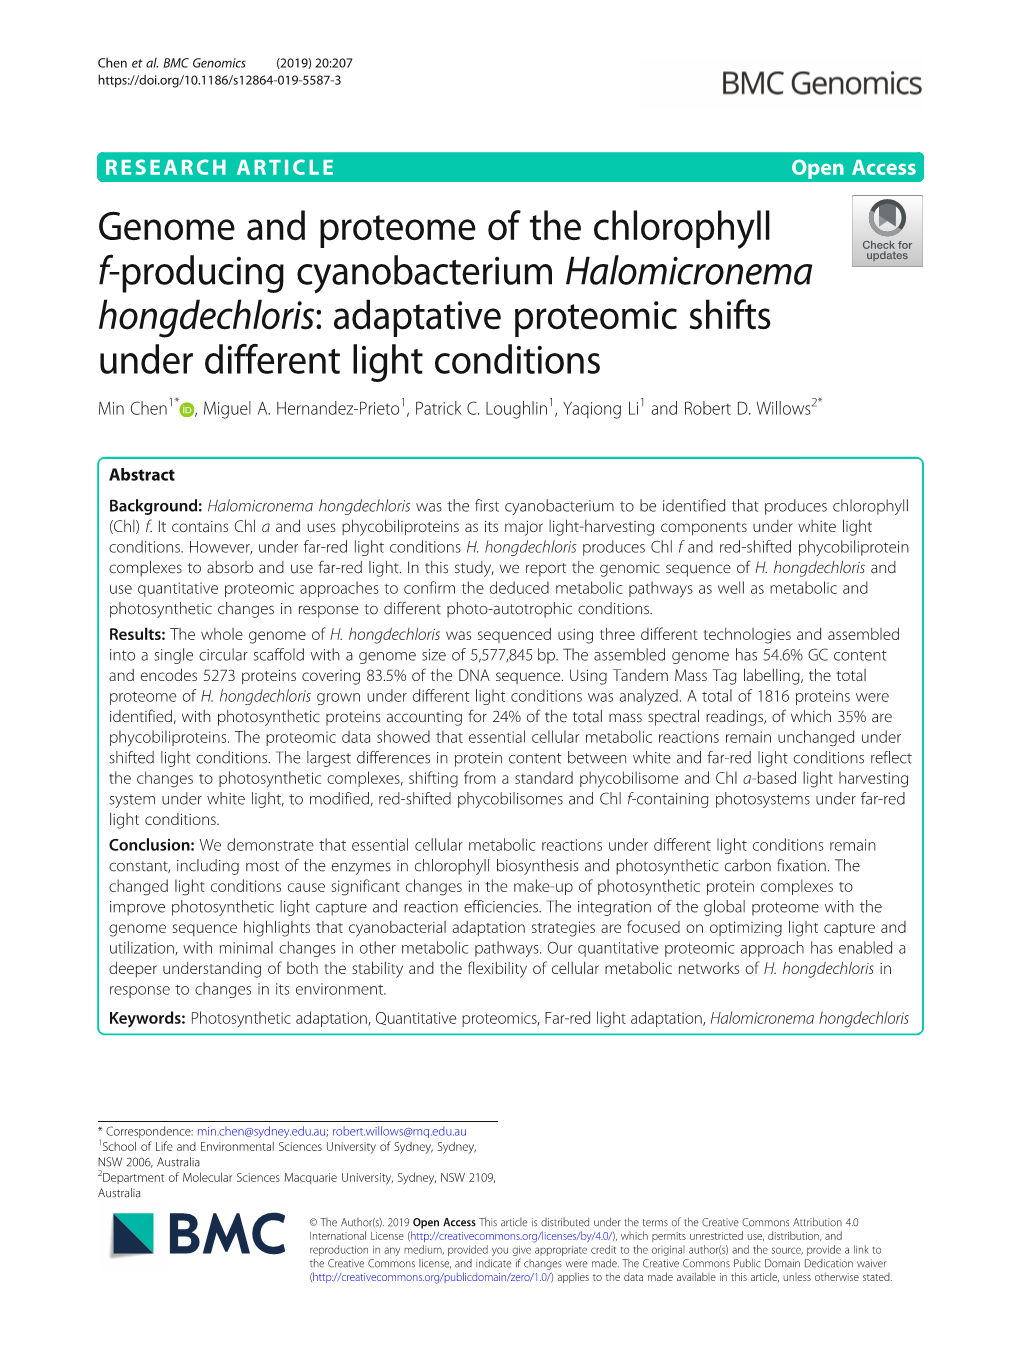 Genome and Proteome of the Chlorophyll F-Producing